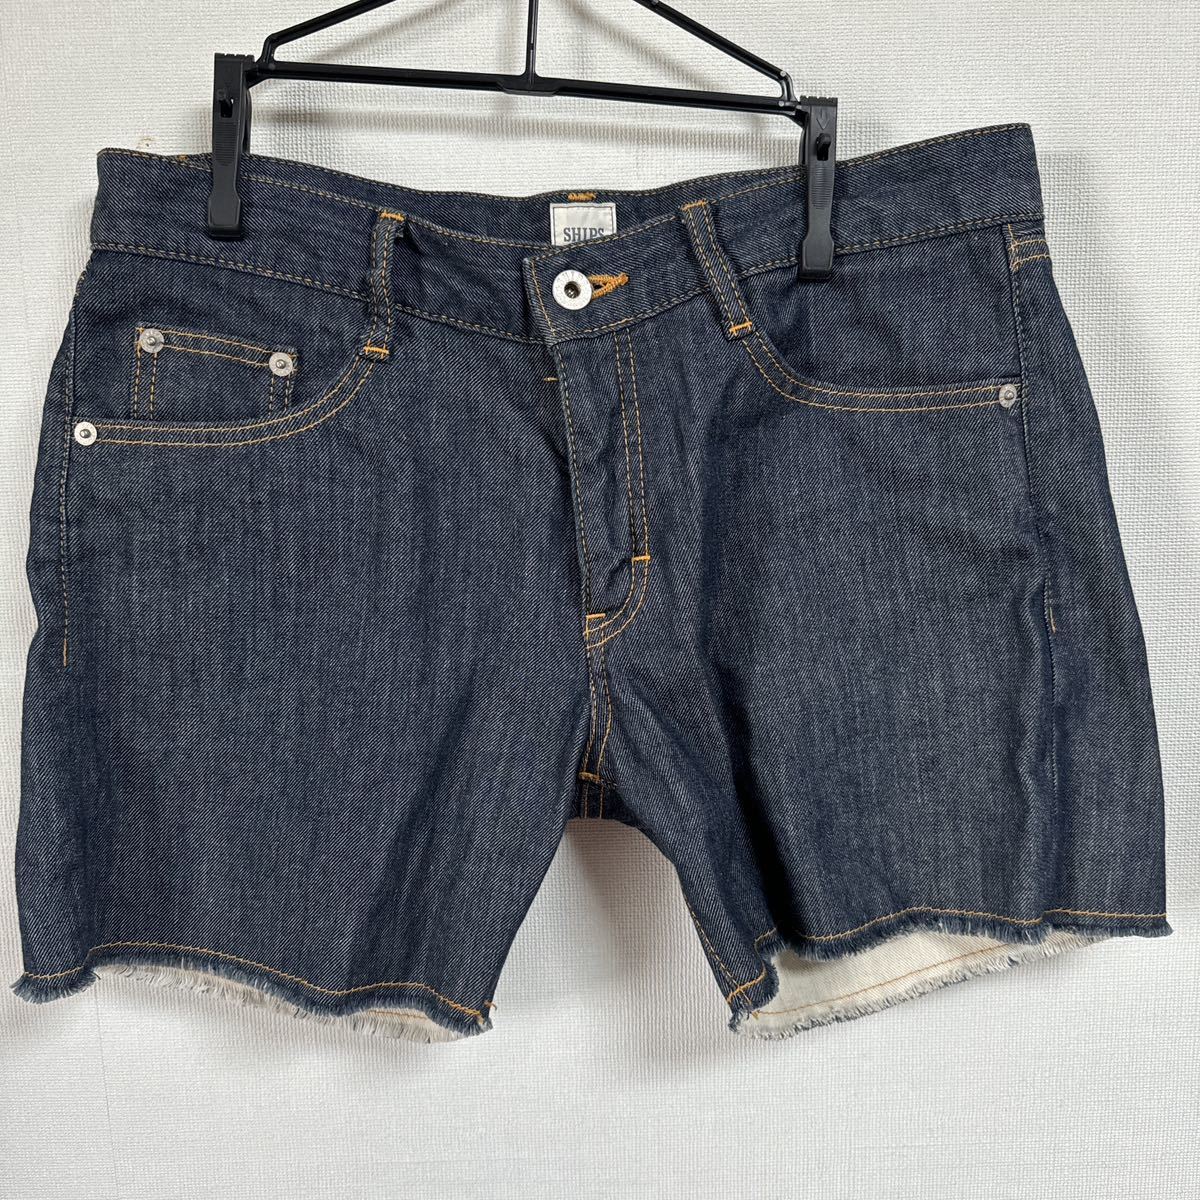 SHIPS Denim short pants L size beautiful goods postage included 